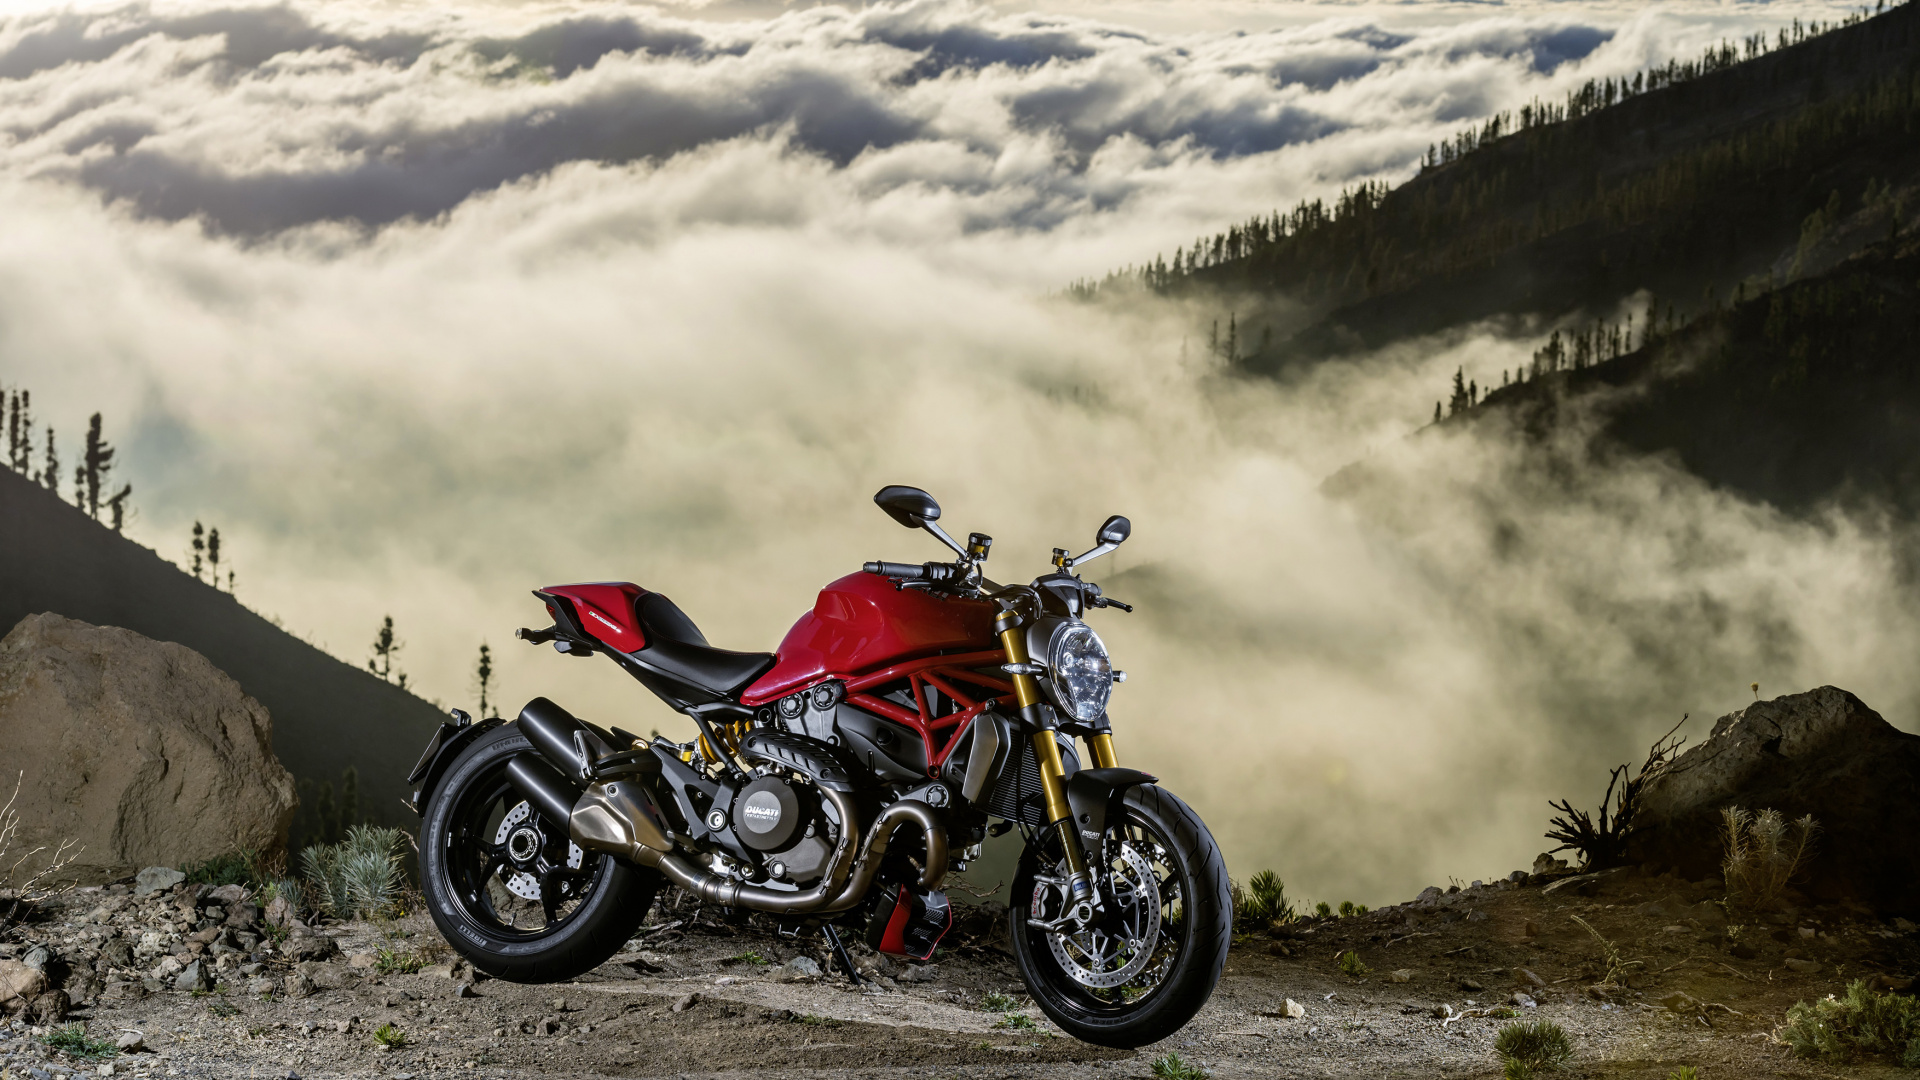 Red and Black Sports Bike on Brown Field Under White Clouds During Daytime. Wallpaper in 1920x1080 Resolution